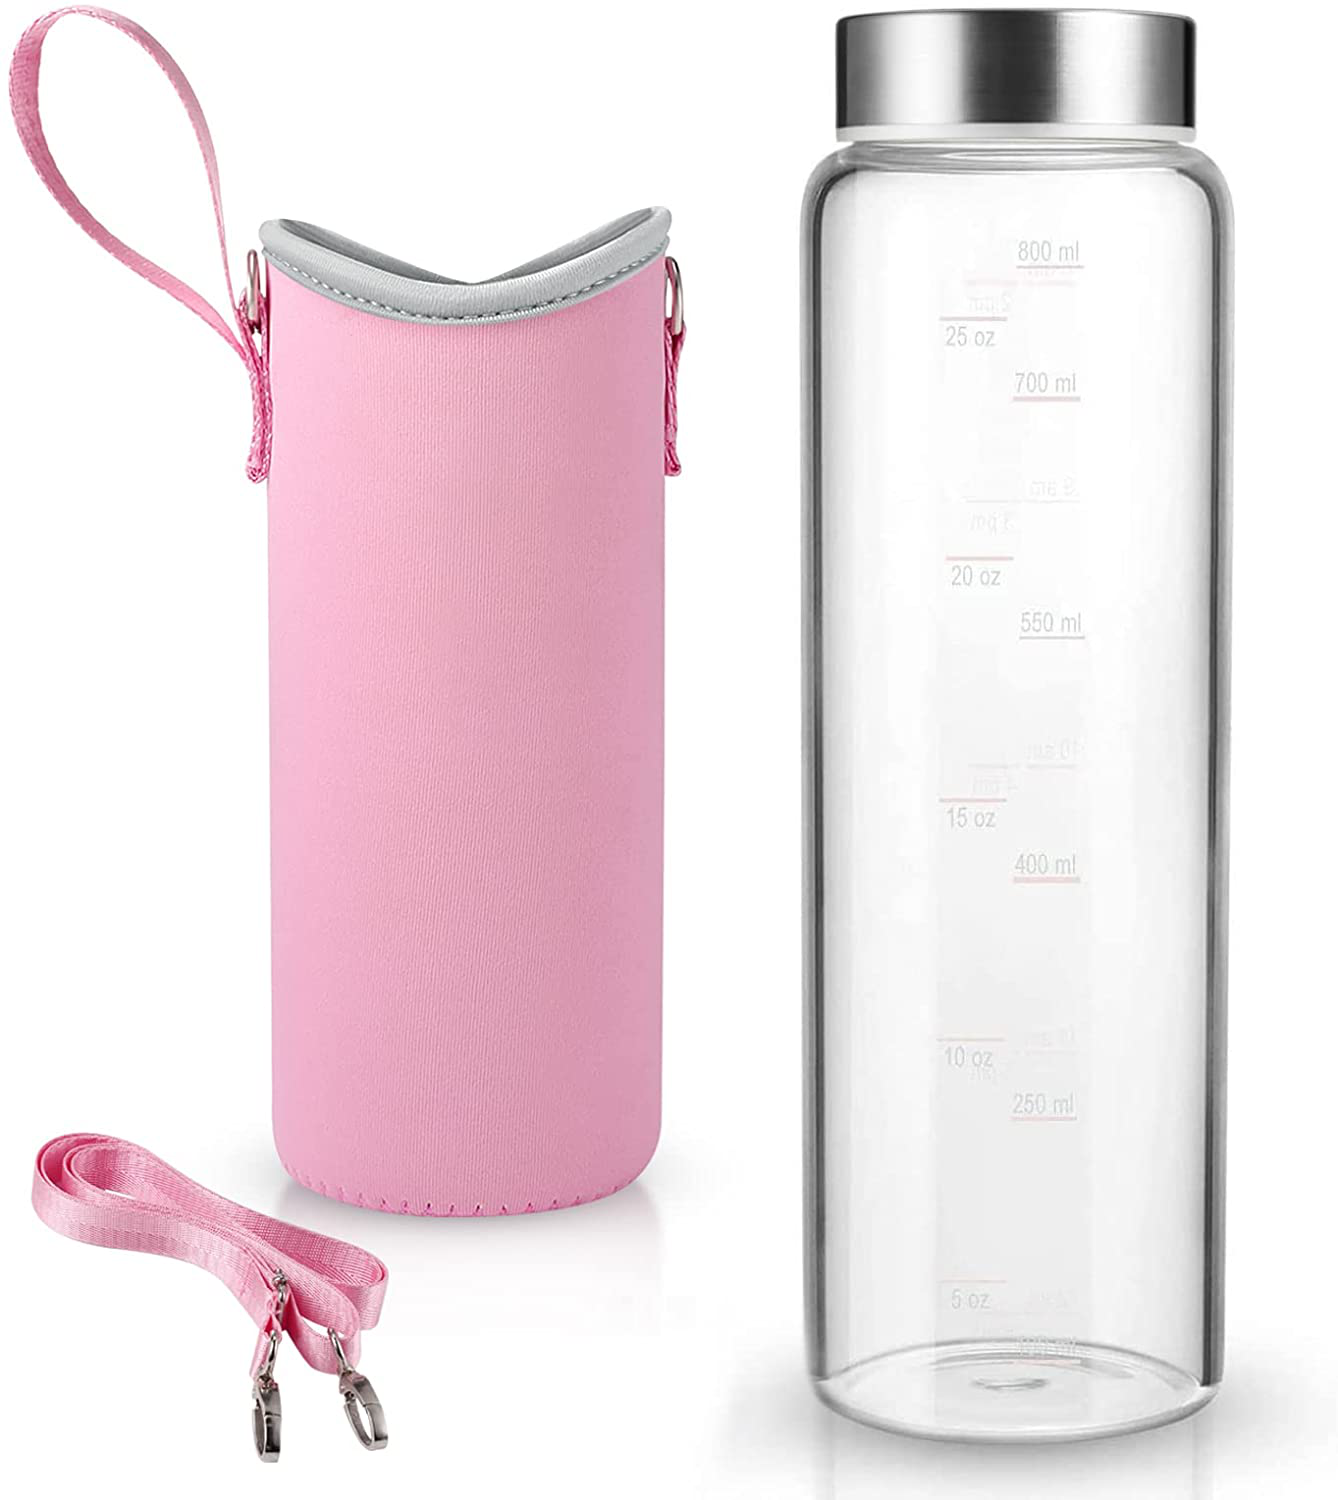 32 Oz Glass Water Bottle - Nylon Bottle Protection Sleeves, Bamboo Lid, and 1L Time Marked Measurements, Reusable, Eco-Friendly, Safe for Hot Liquids Tea Coffee Daily